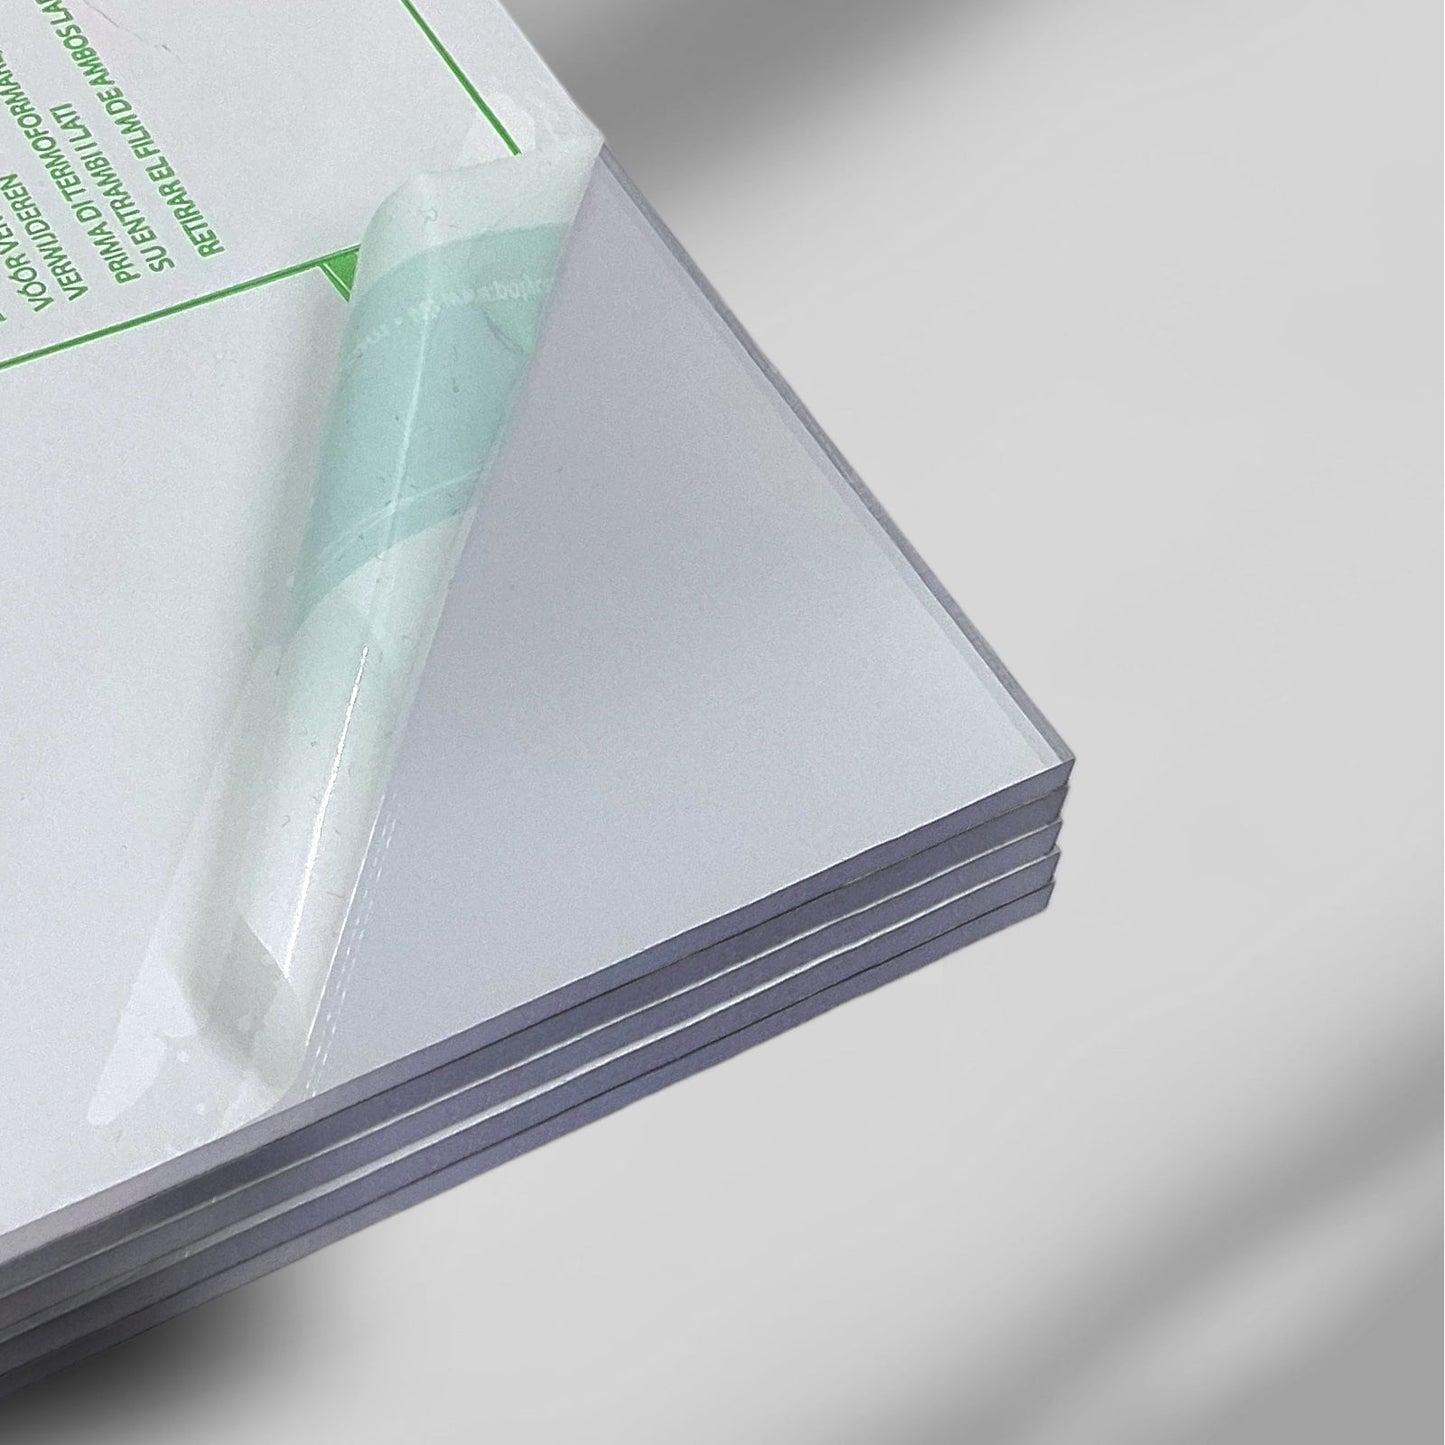 1/4" Clear Polycarbonate Sheet